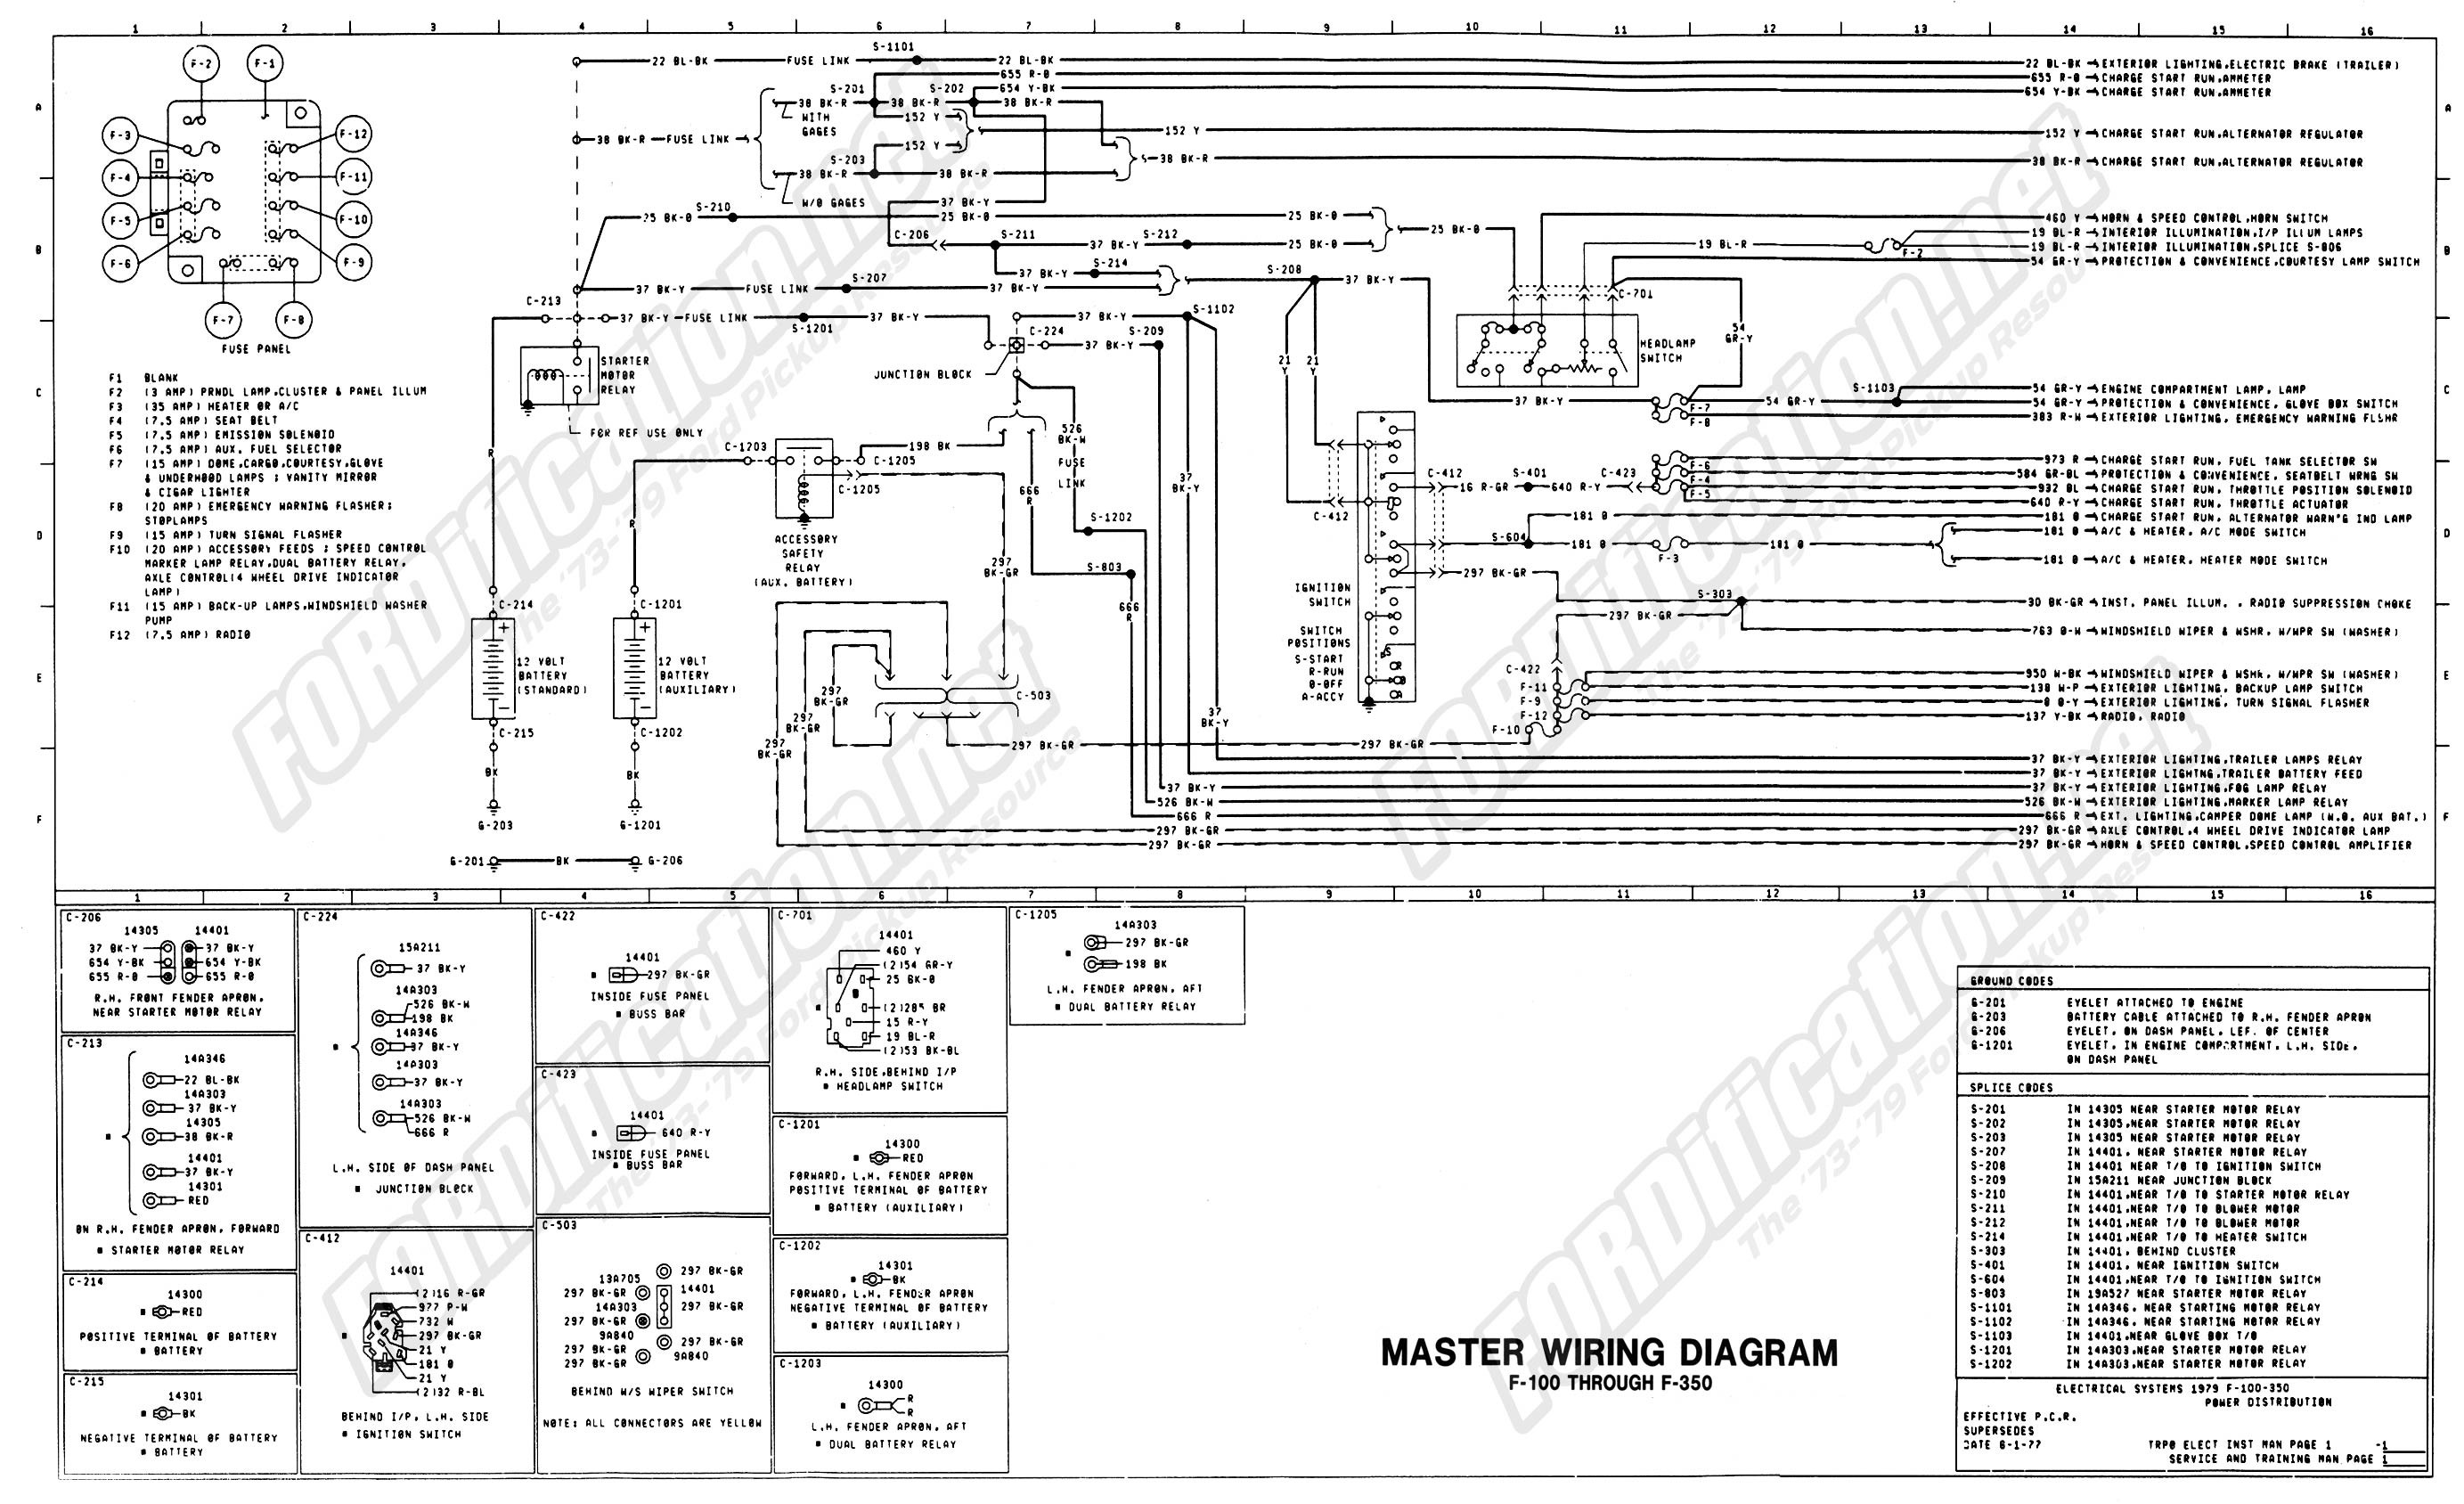 1998 Ford F150 Wiring Harness Diagram from detoxicrecenze.com